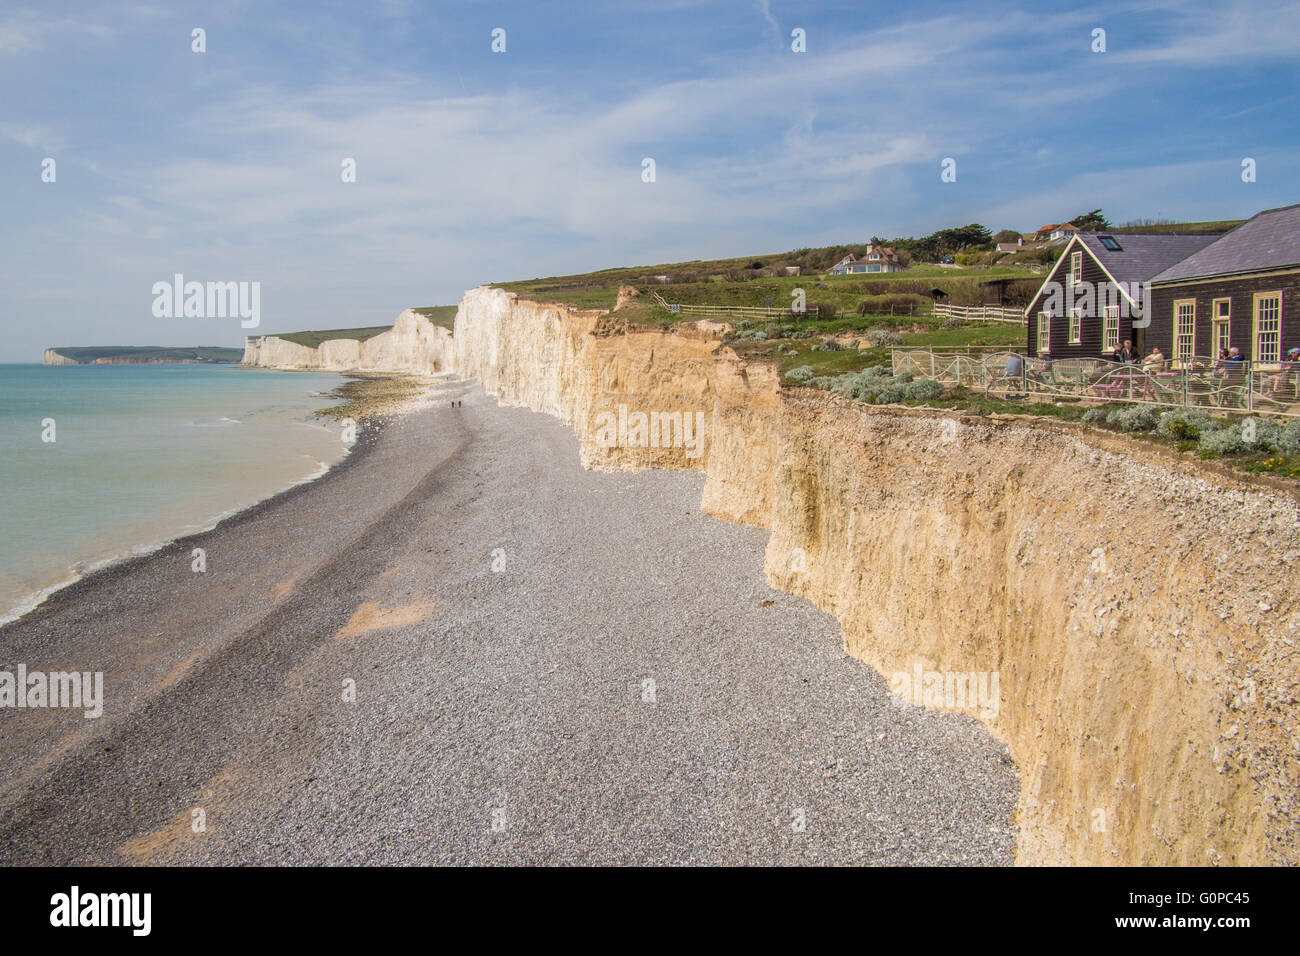 Birling Gap (a sand and shingle beach near Eastbourne) and the 'Seven Sisters' cliffs, East Sussex, England. Stock Photo